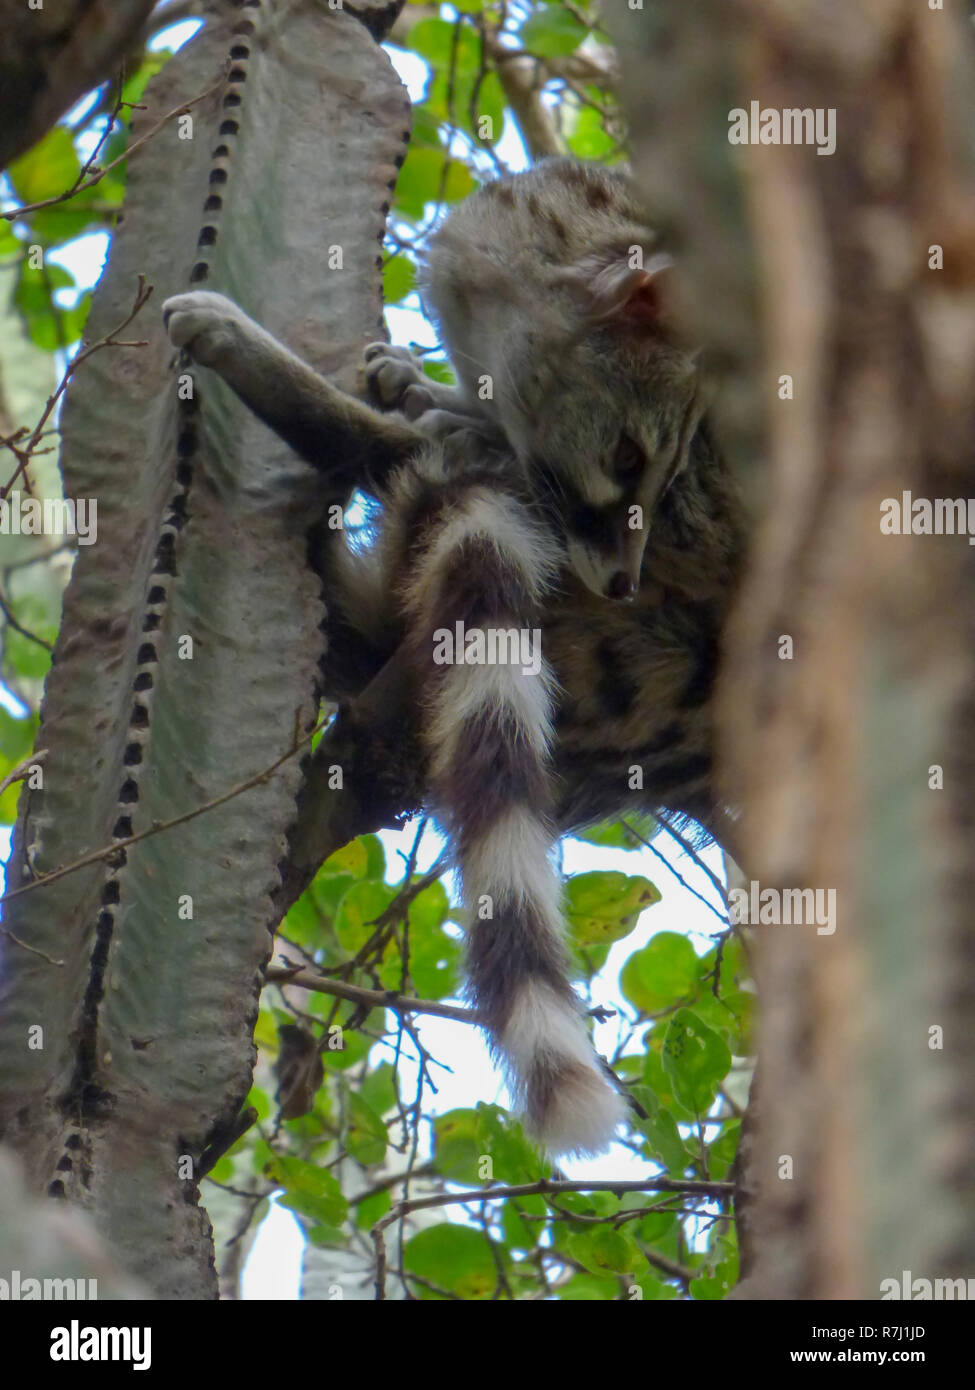 common genet (Genetta genetta) in a tree. The common genet is a solitary carnivore that inhabits woodlands. It is arboreal, resting in trees during th Stock Photo